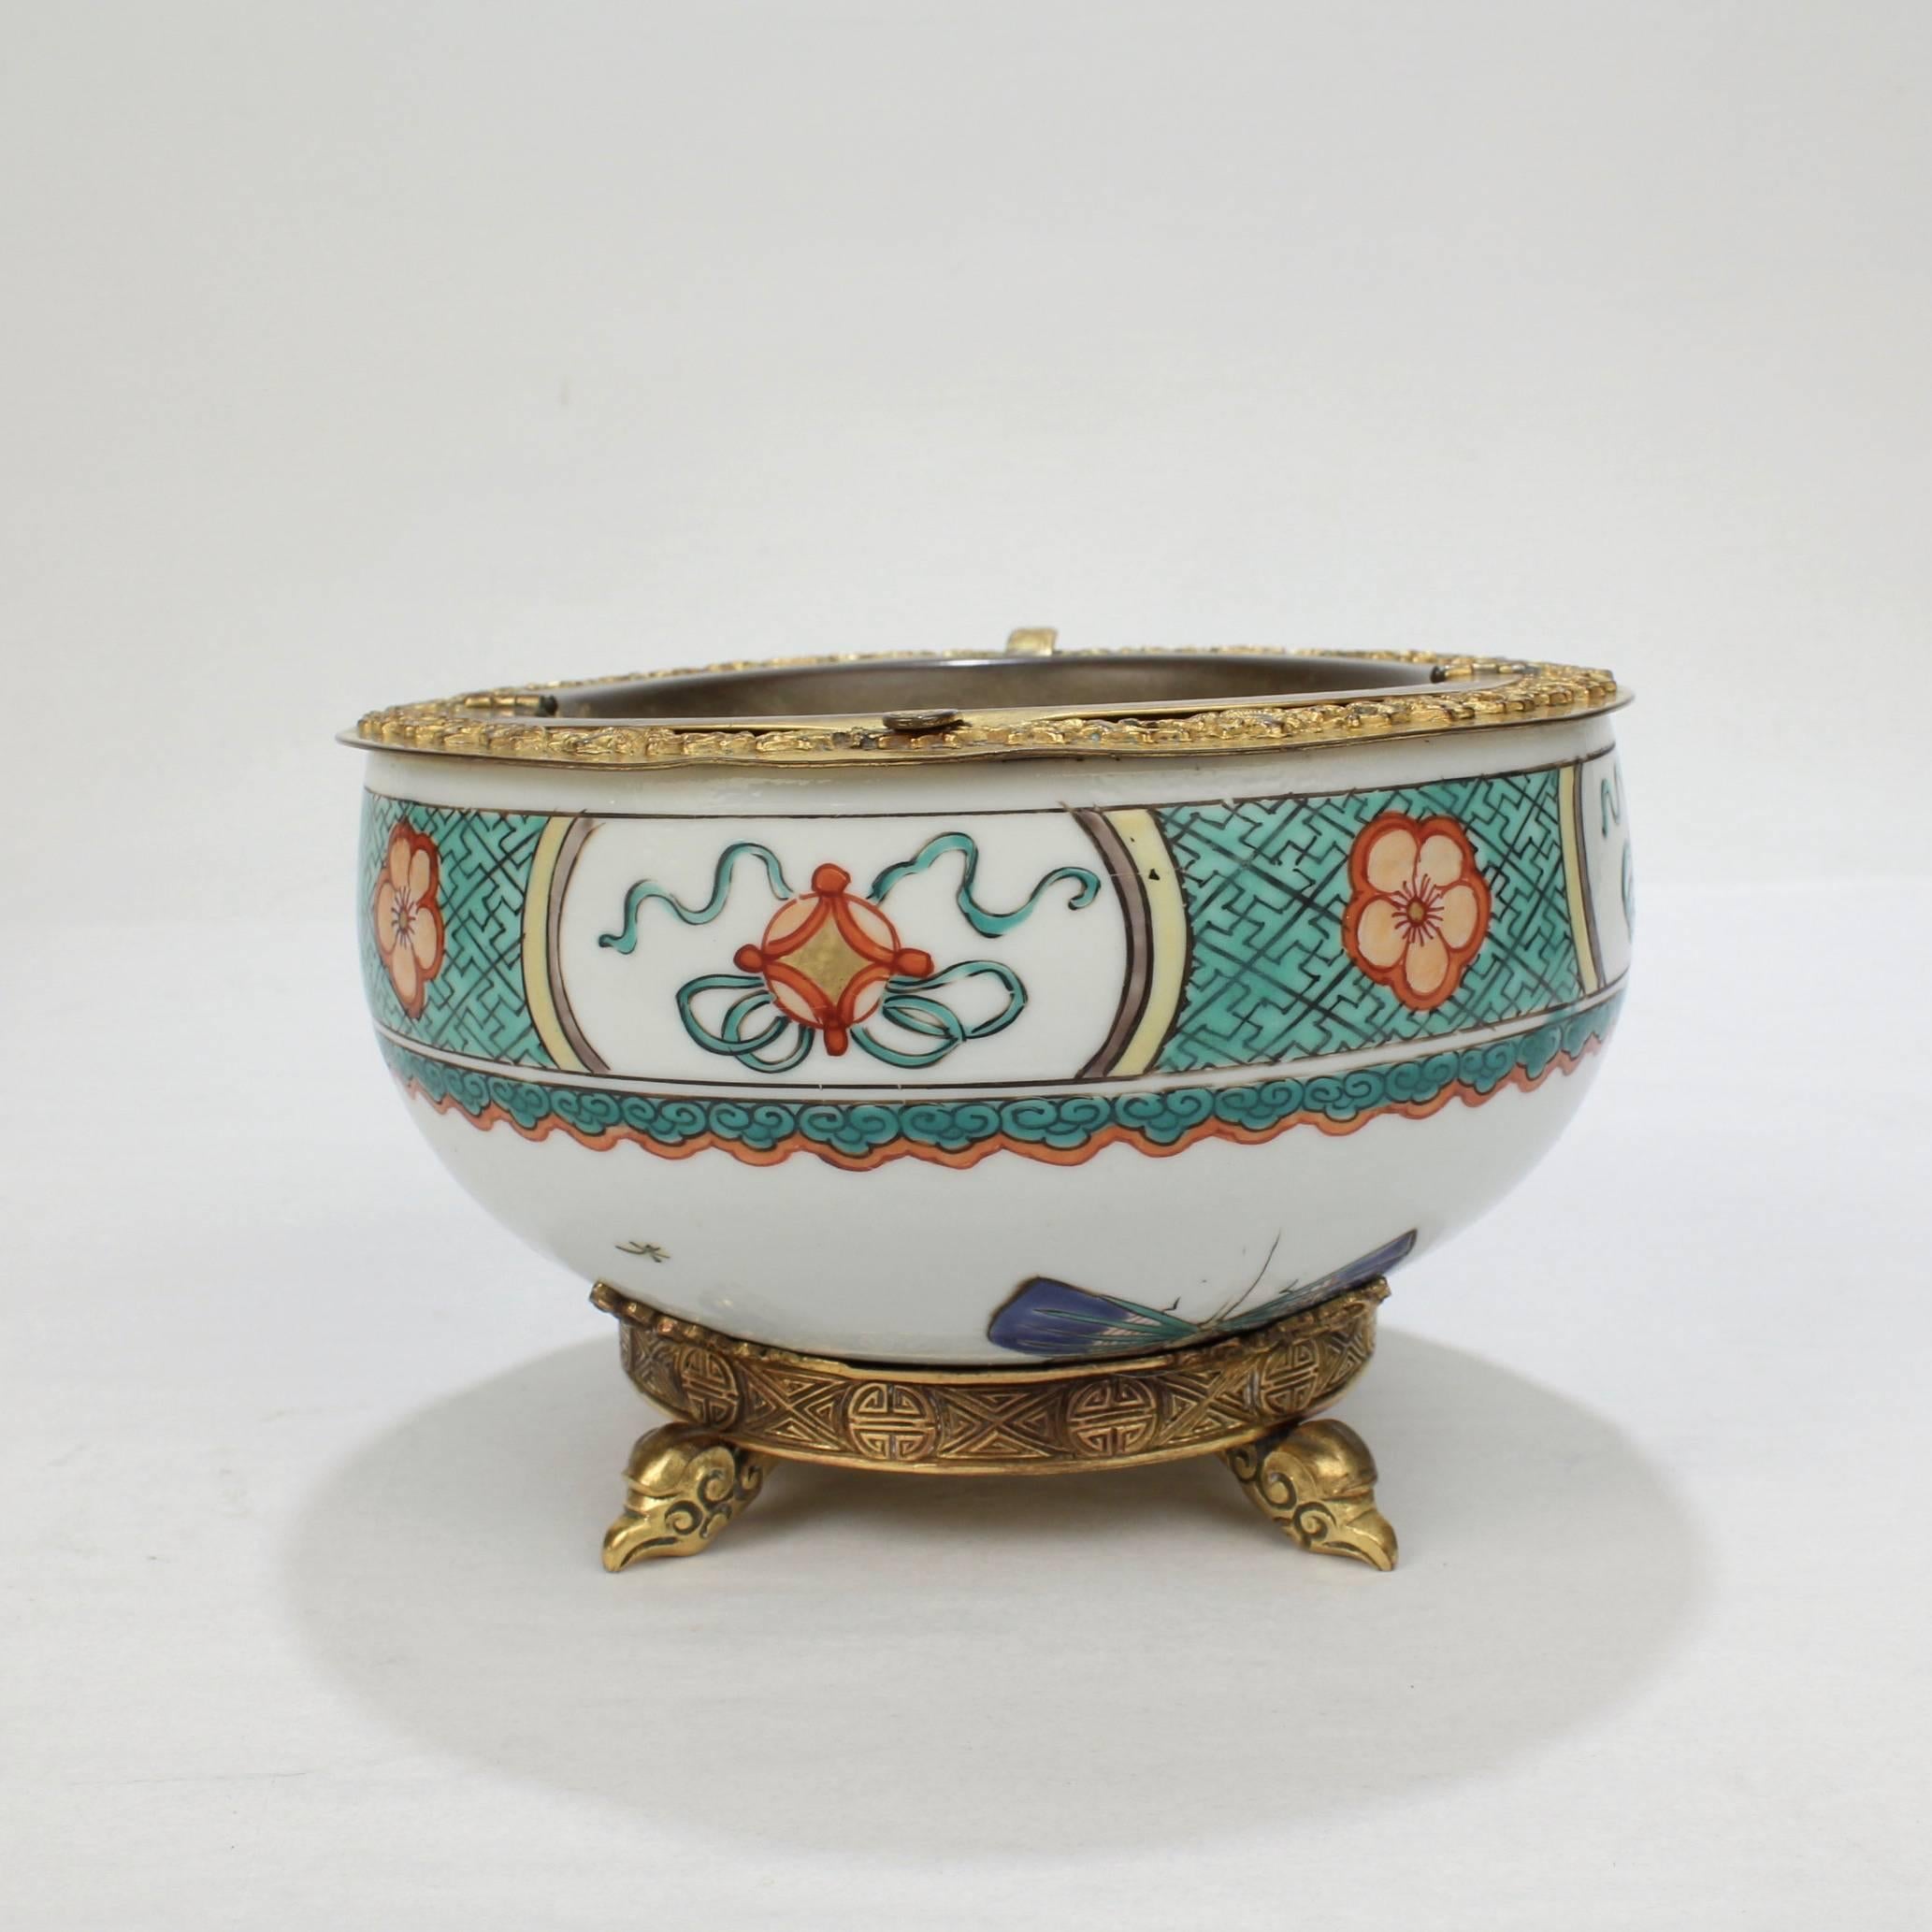 American Gilded Age E F Caldwell Bronze-Mounted Chinese Export Porcelain Ashtray